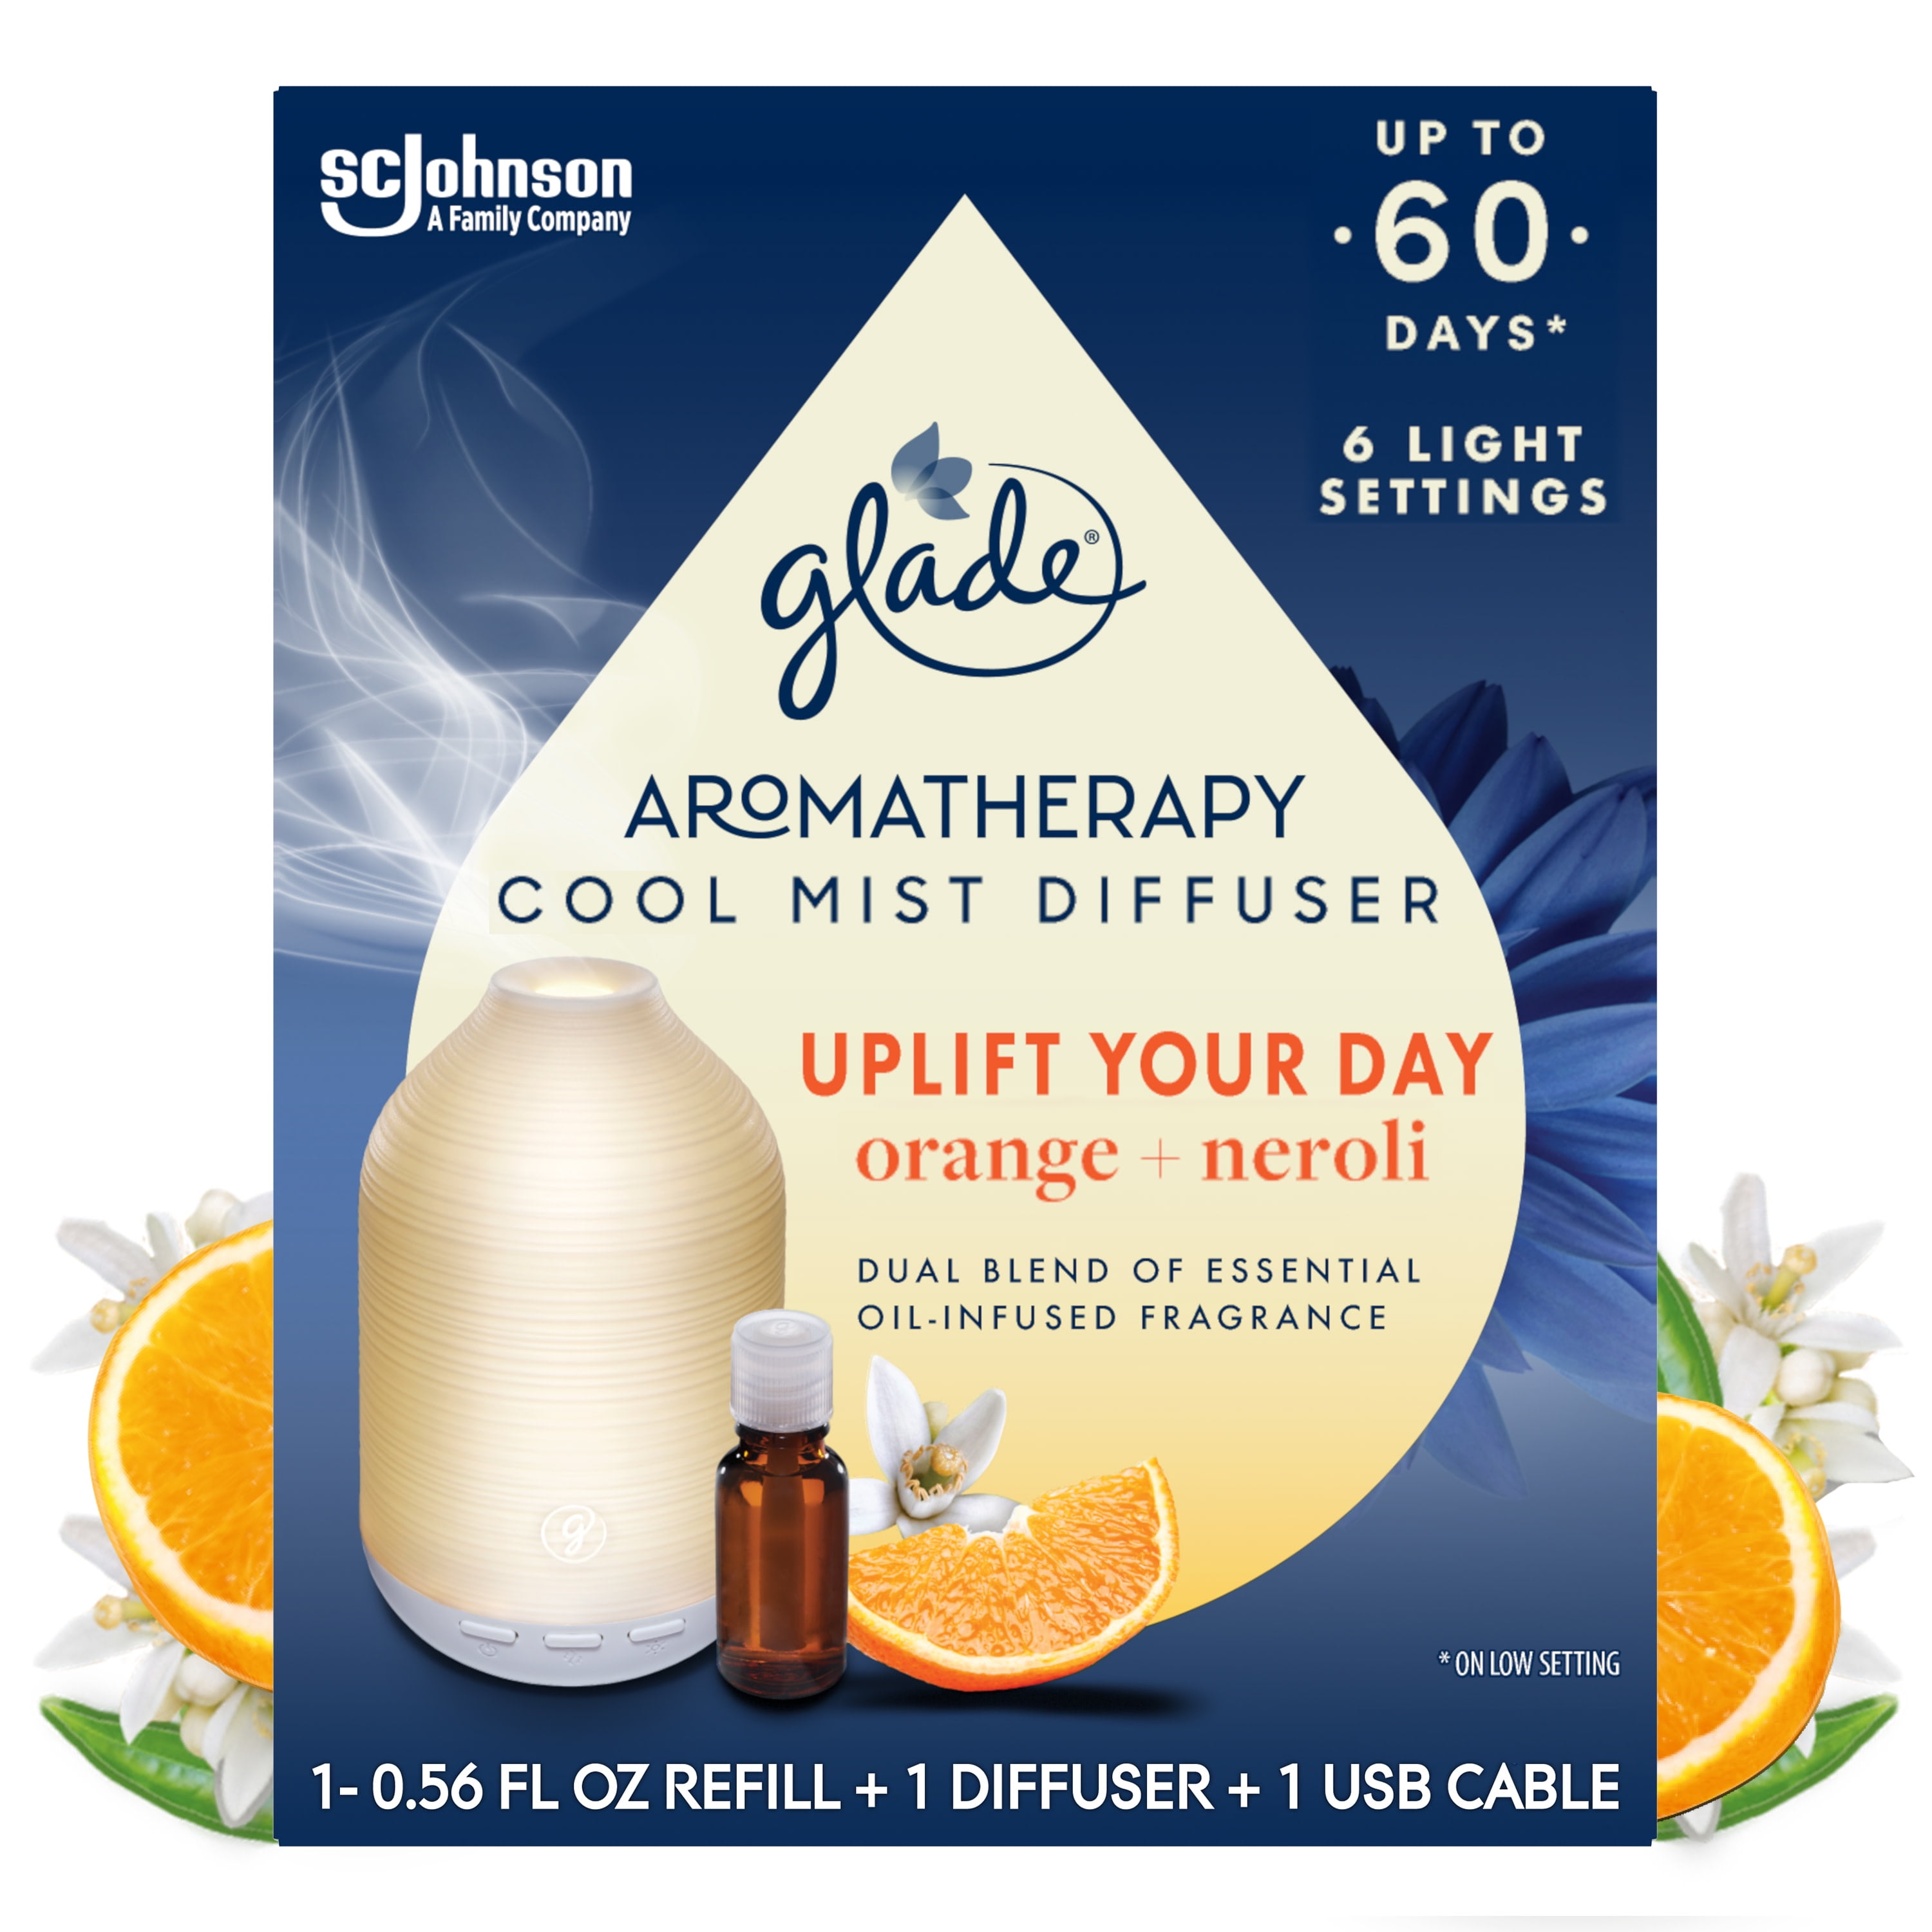 Glade Essential Oil Diffuser, Uplift Your Day Scentwith Notes of Orange & Neroli, 0.56 oz (16.8 ml), Cool Mist Aromatherapy Diffuser & Air Freshener for Home